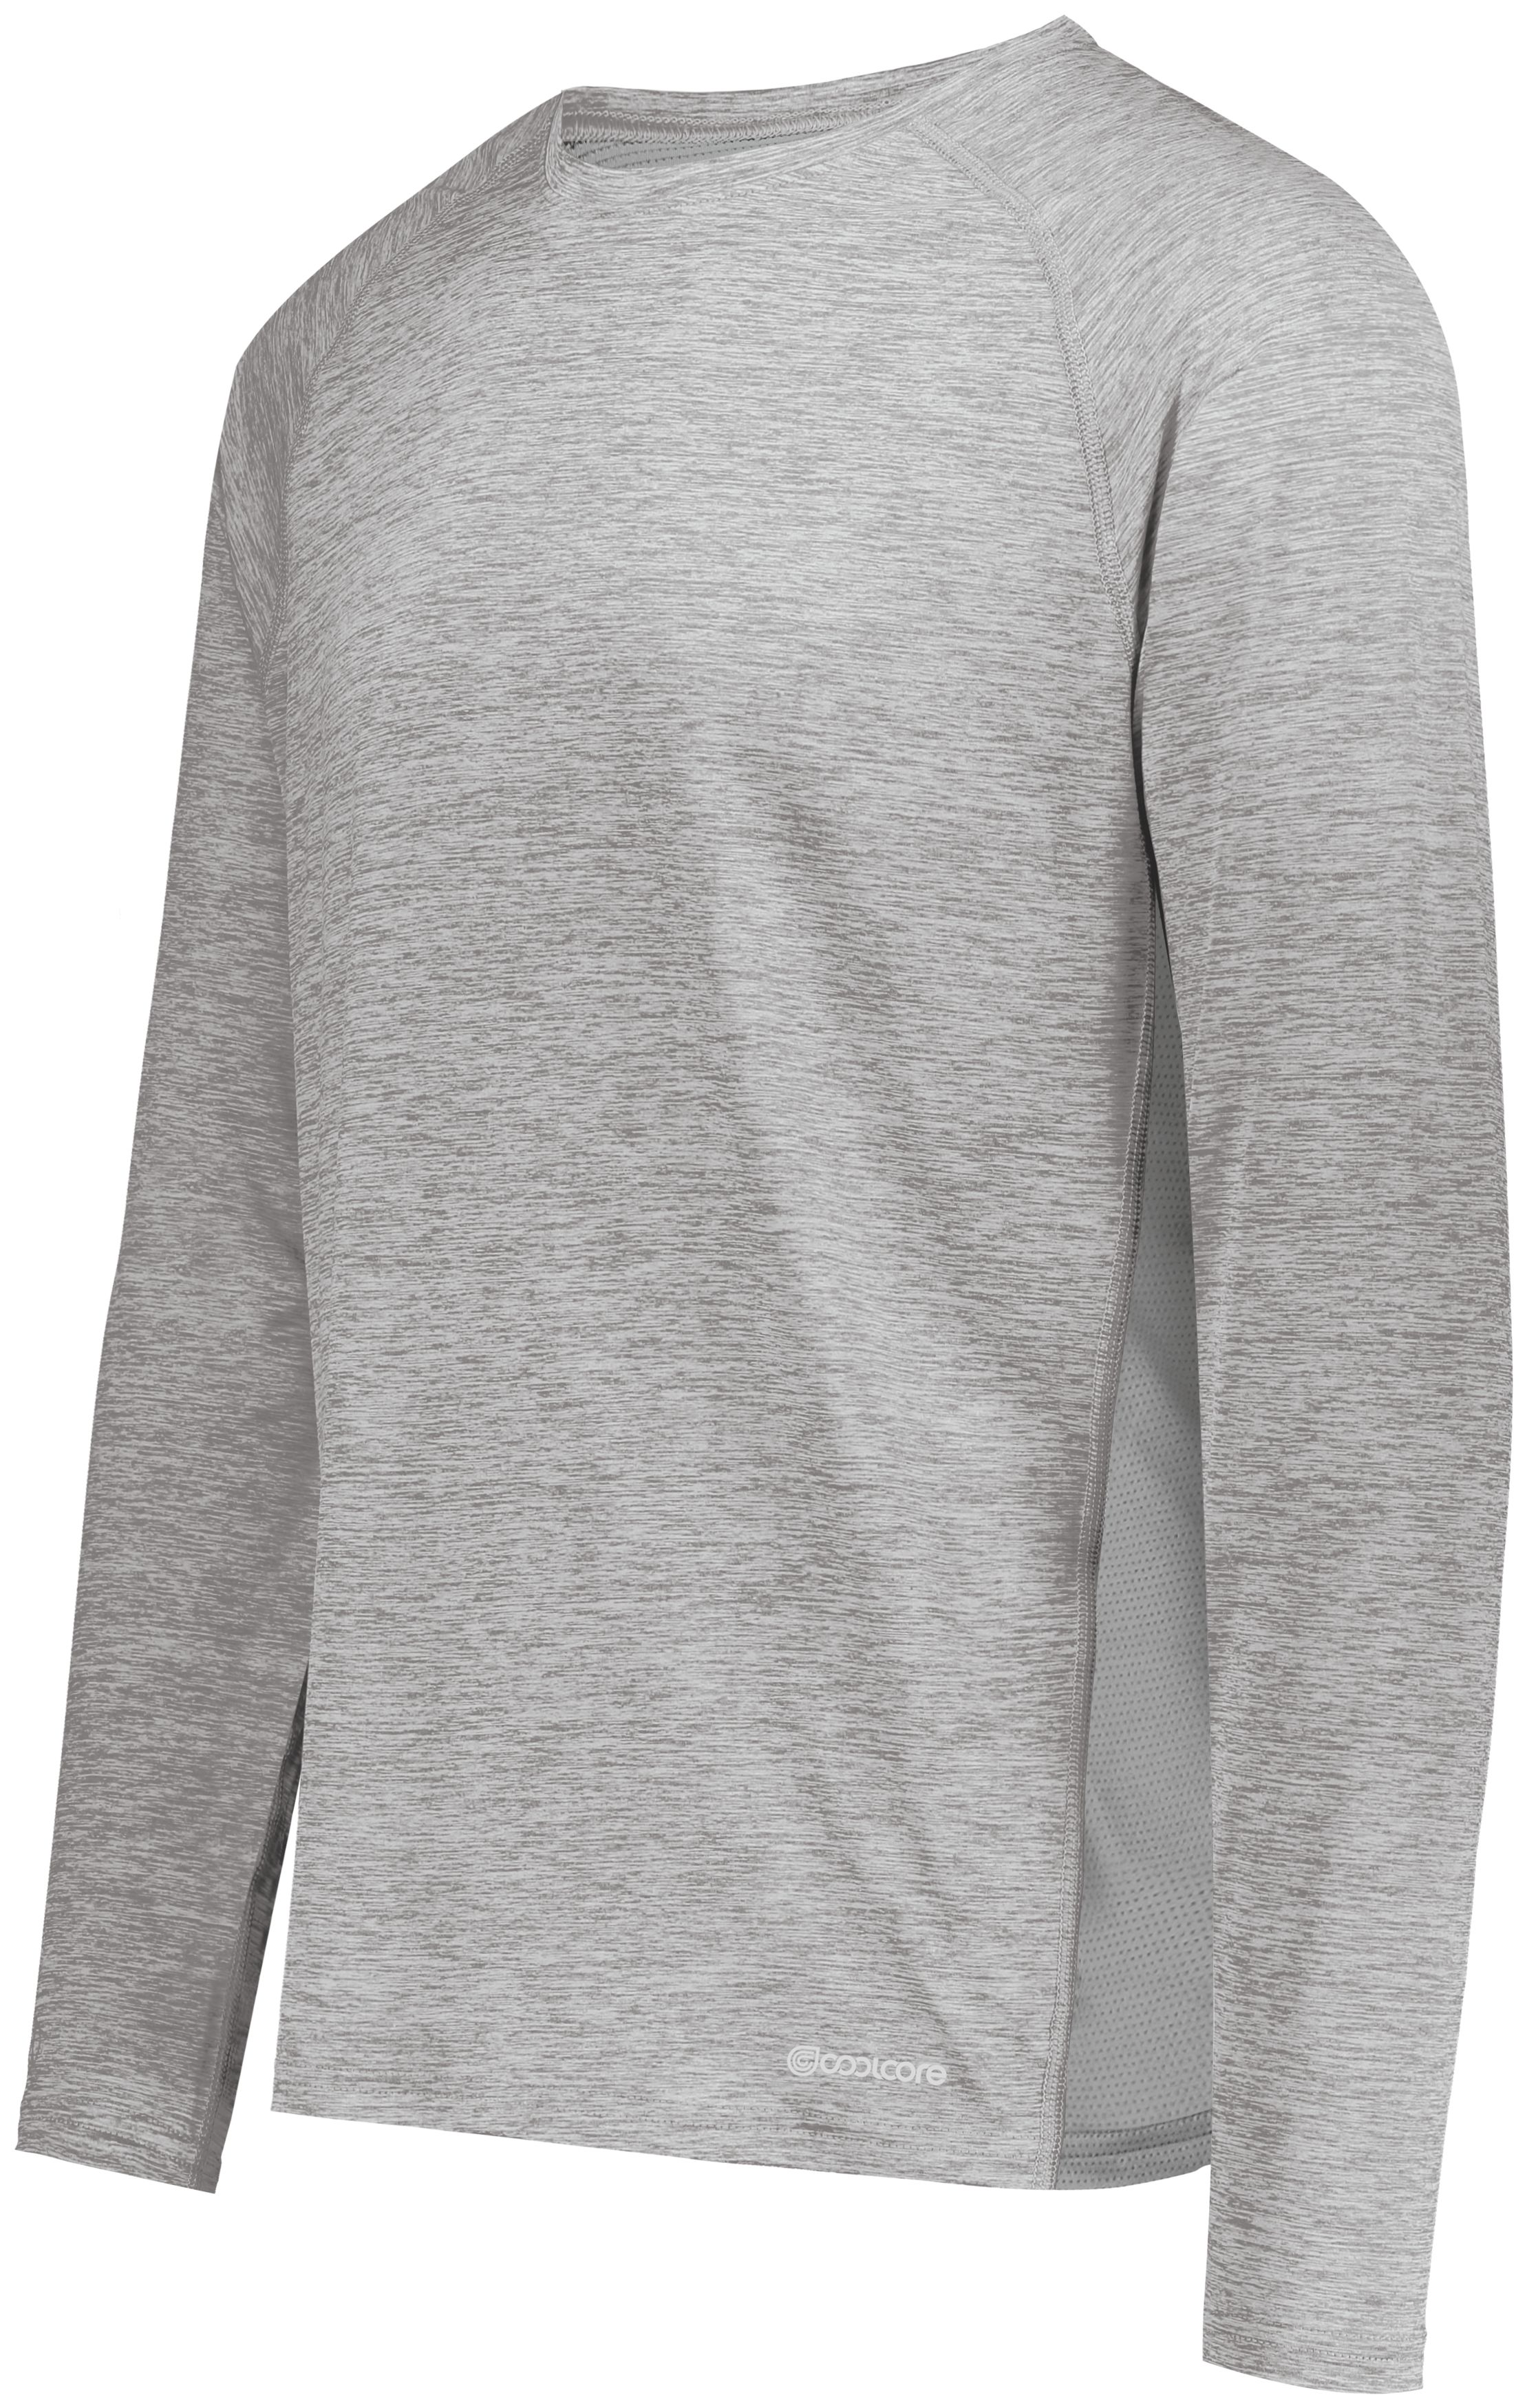 click to view Athletic Grey Heather